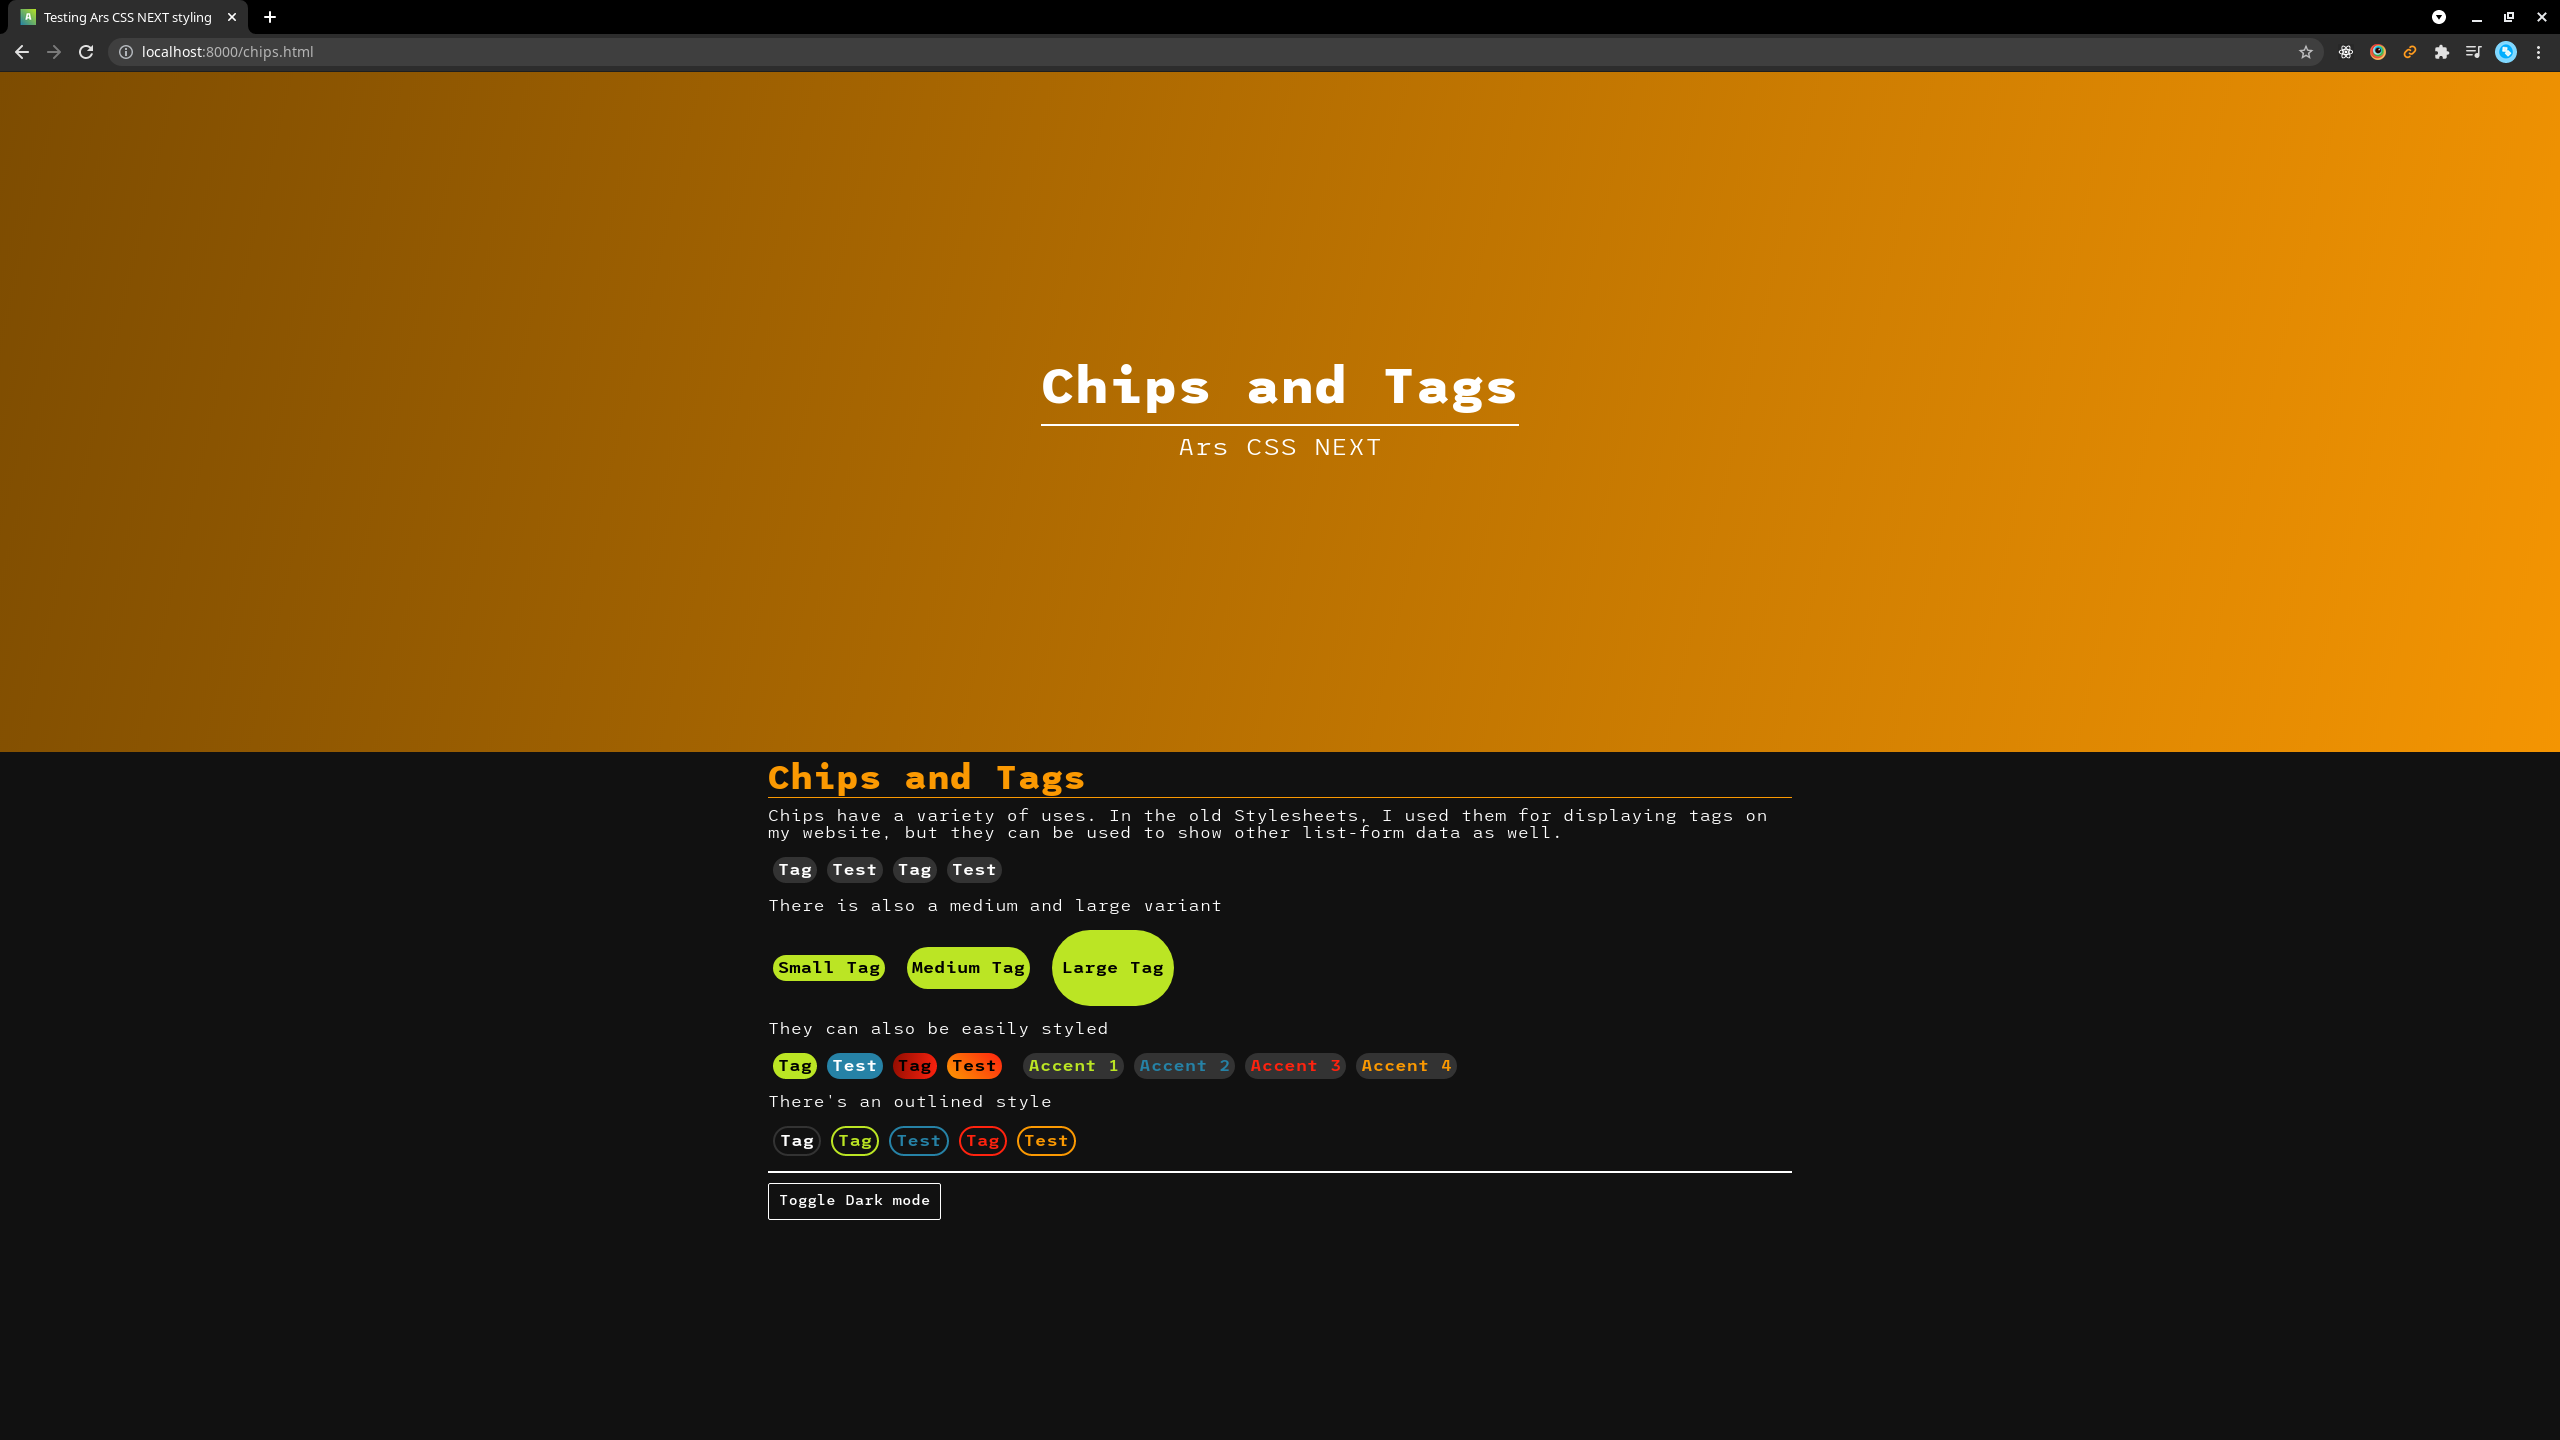 Chips, which are going to be used as tags